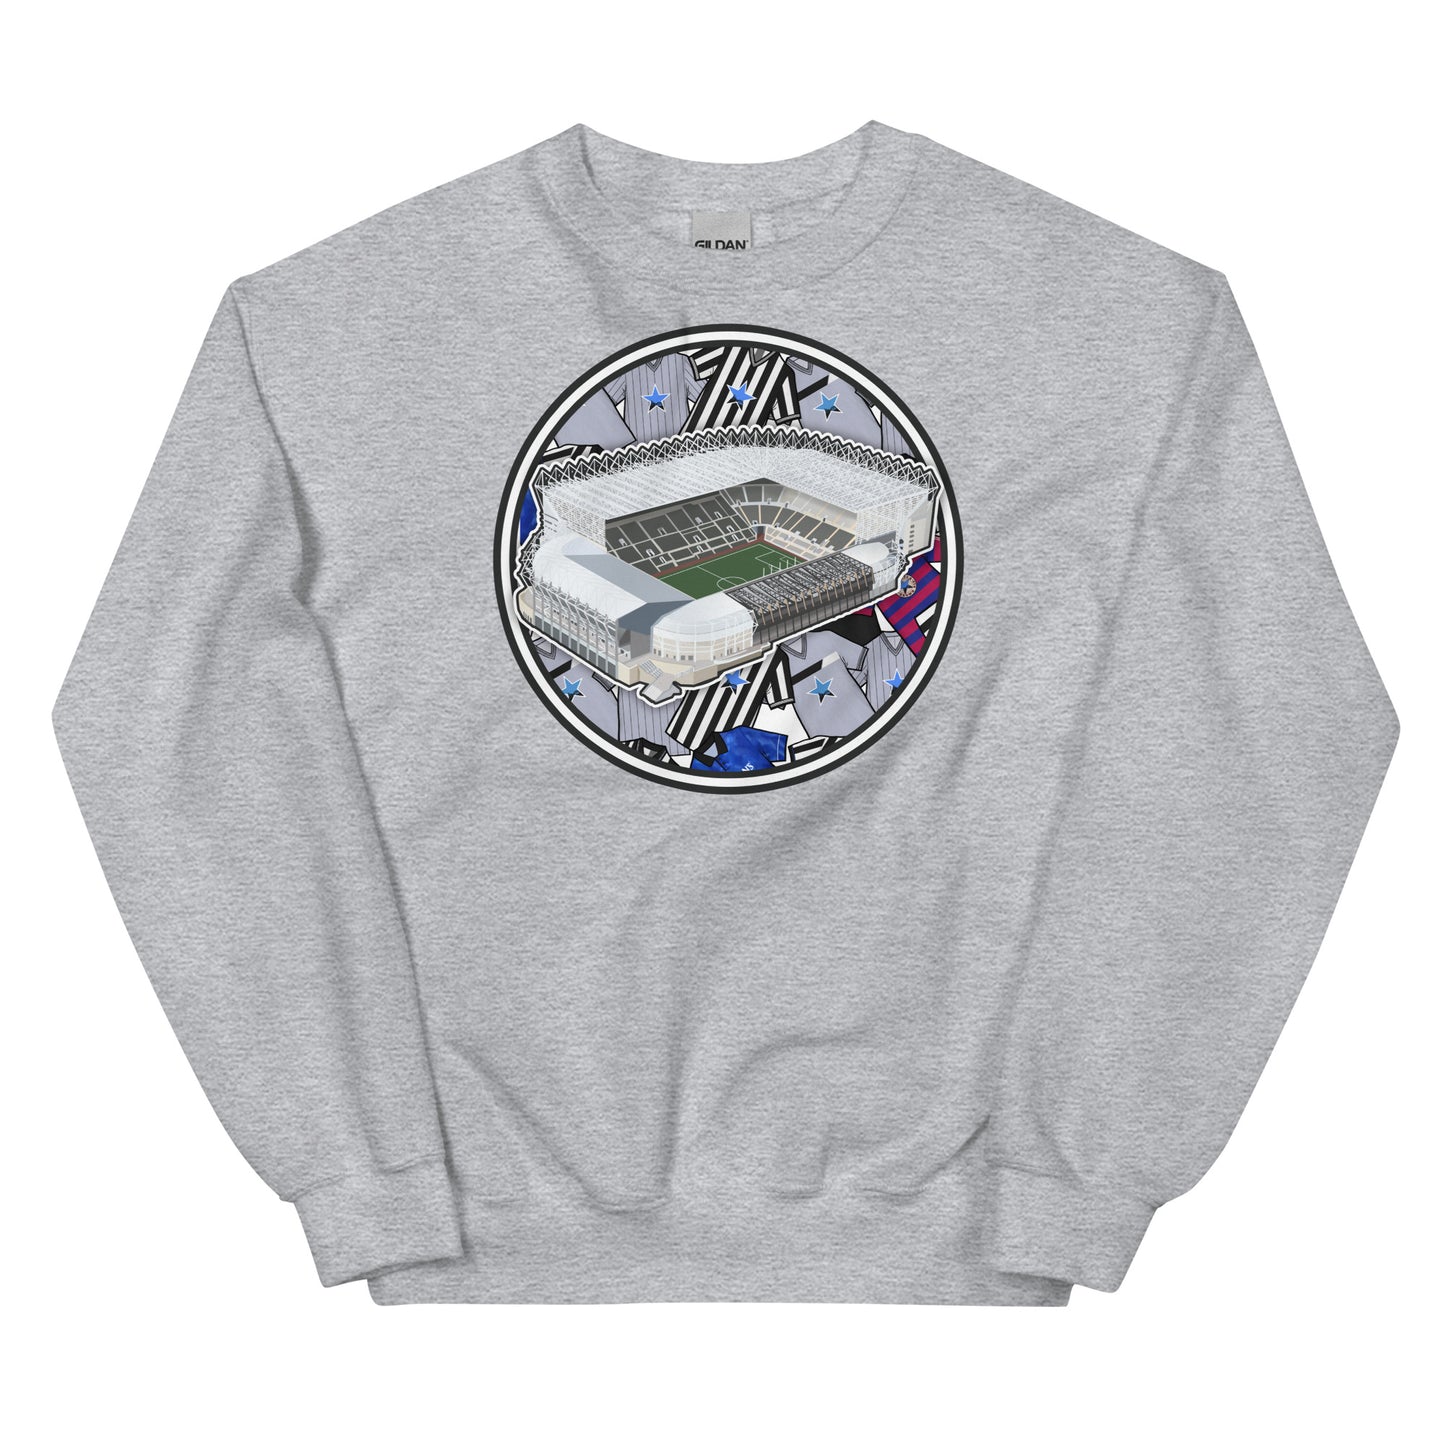 Grey unisex sweatshirt jumper Inspired by the home of Newcastle United, St James' Park in Tyneside.